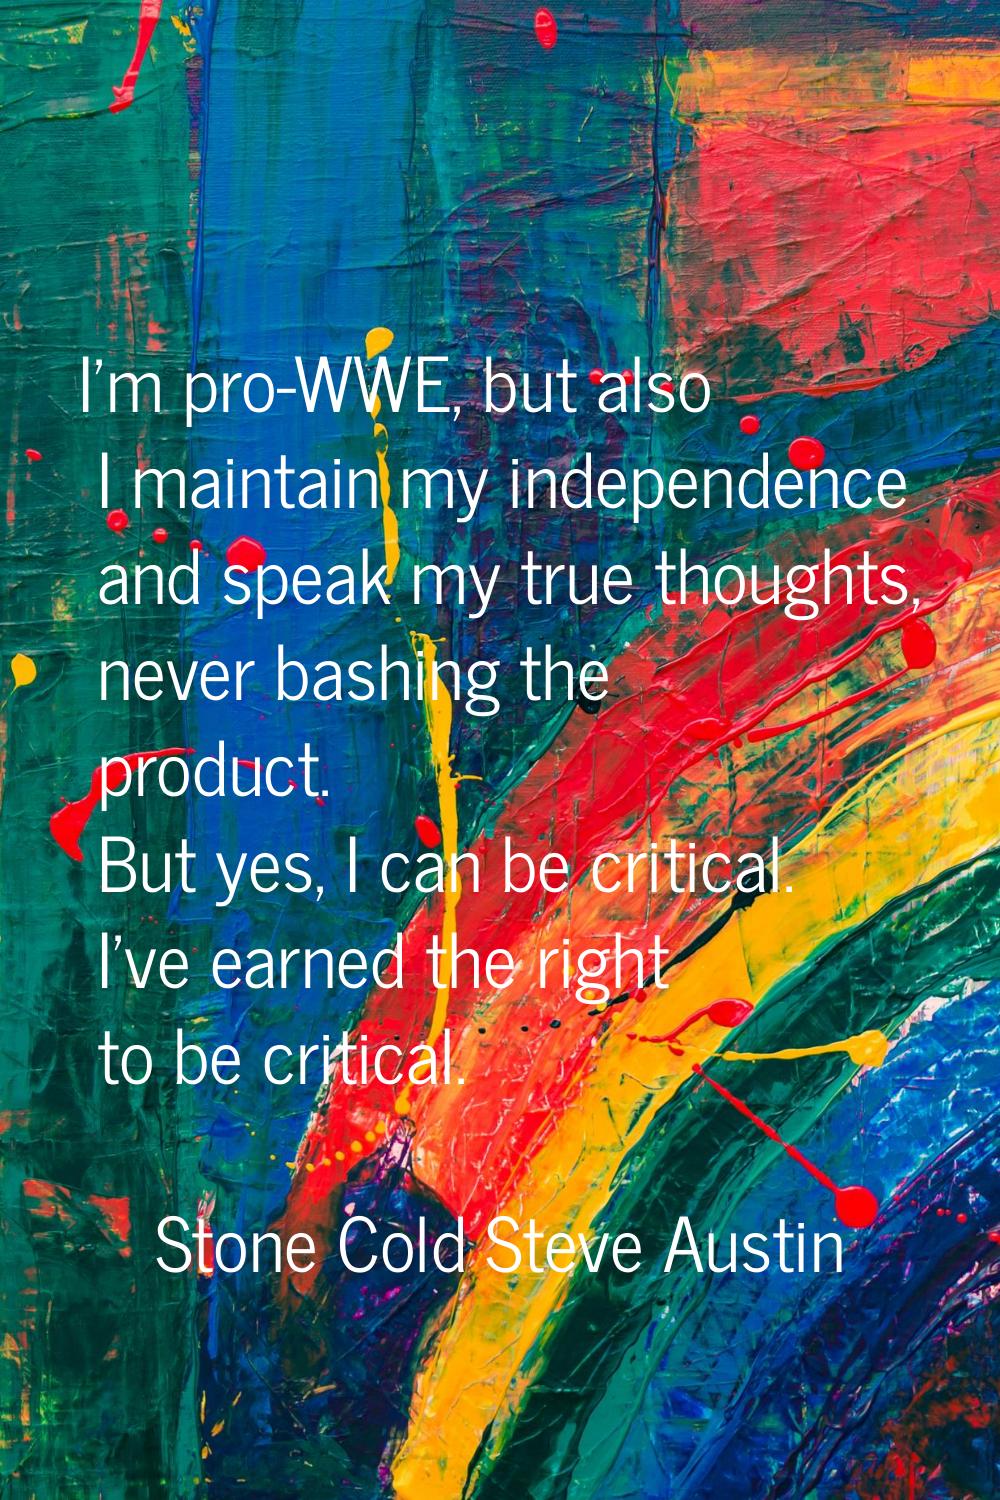 I'm pro-WWE, but also I maintain my independence and speak my true thoughts, never bashing the prod